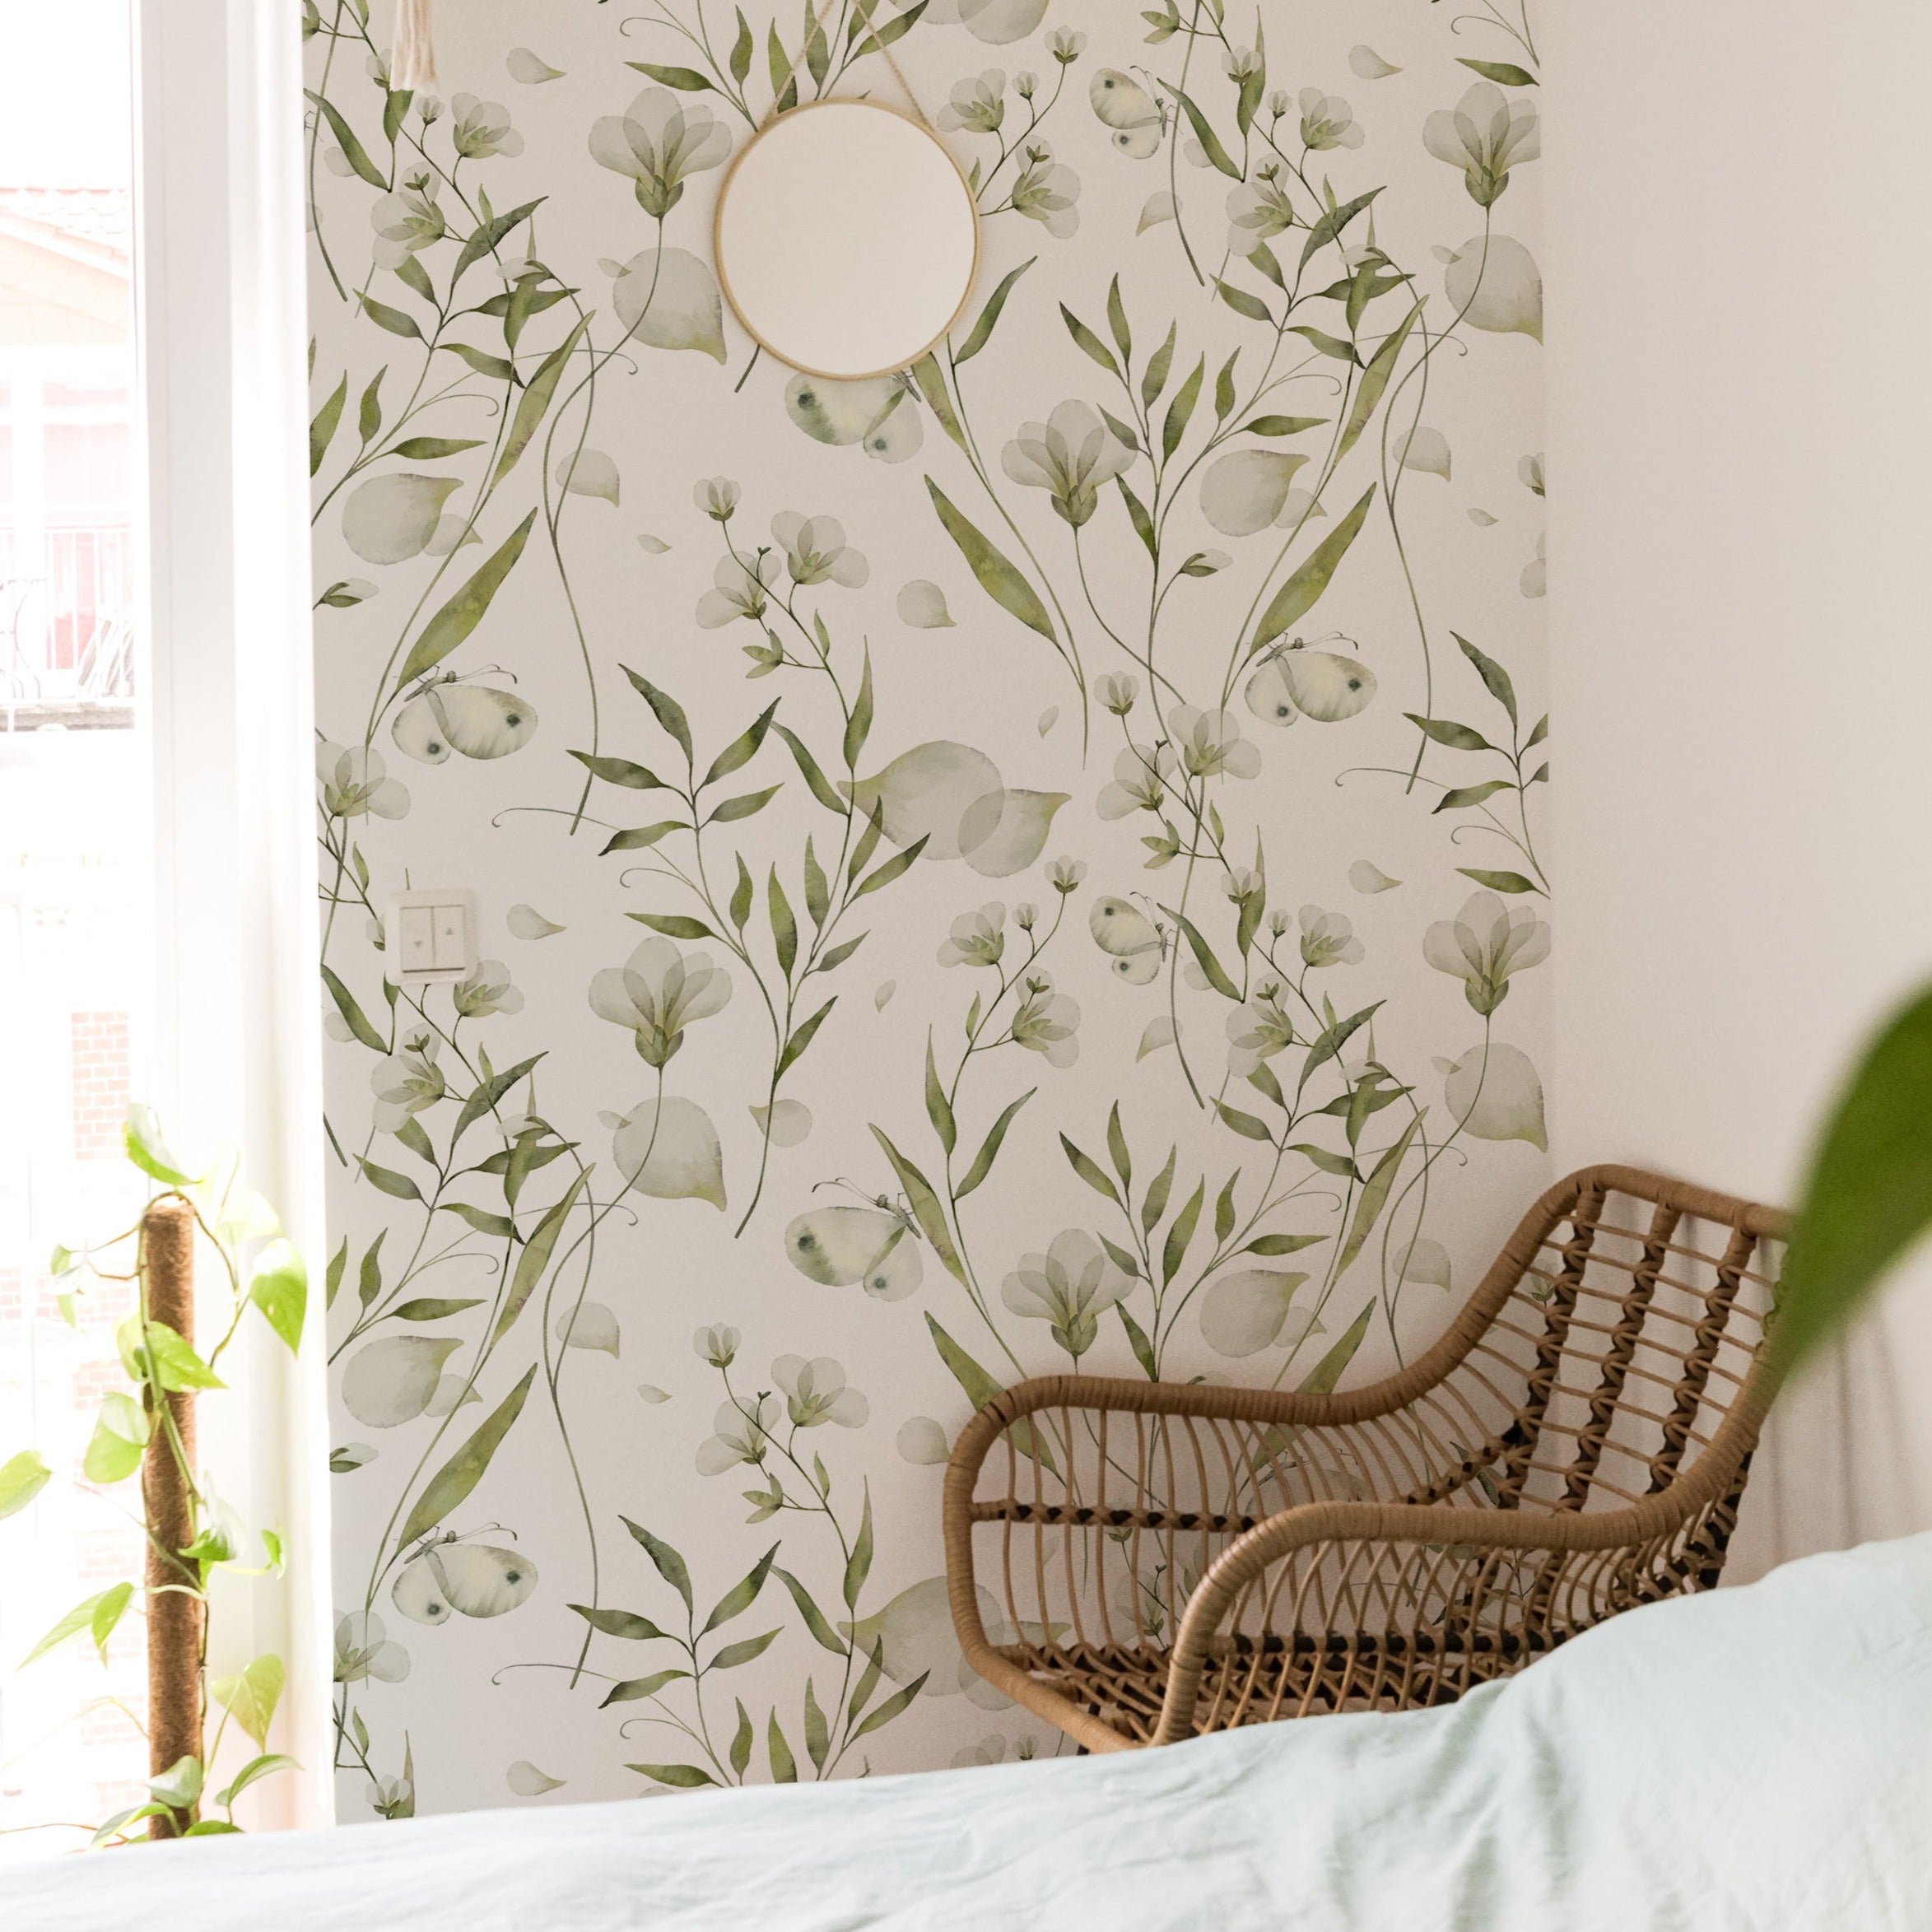 A cozy corner decorated with the 'Botanical Bliss Wallpaper,' illustrating the wallpaper's ability to create a soothing backdrop. A rattan armchair beside a bright window offers a relaxing spot, enhanced by the serene botanical pattern and the soft natural light